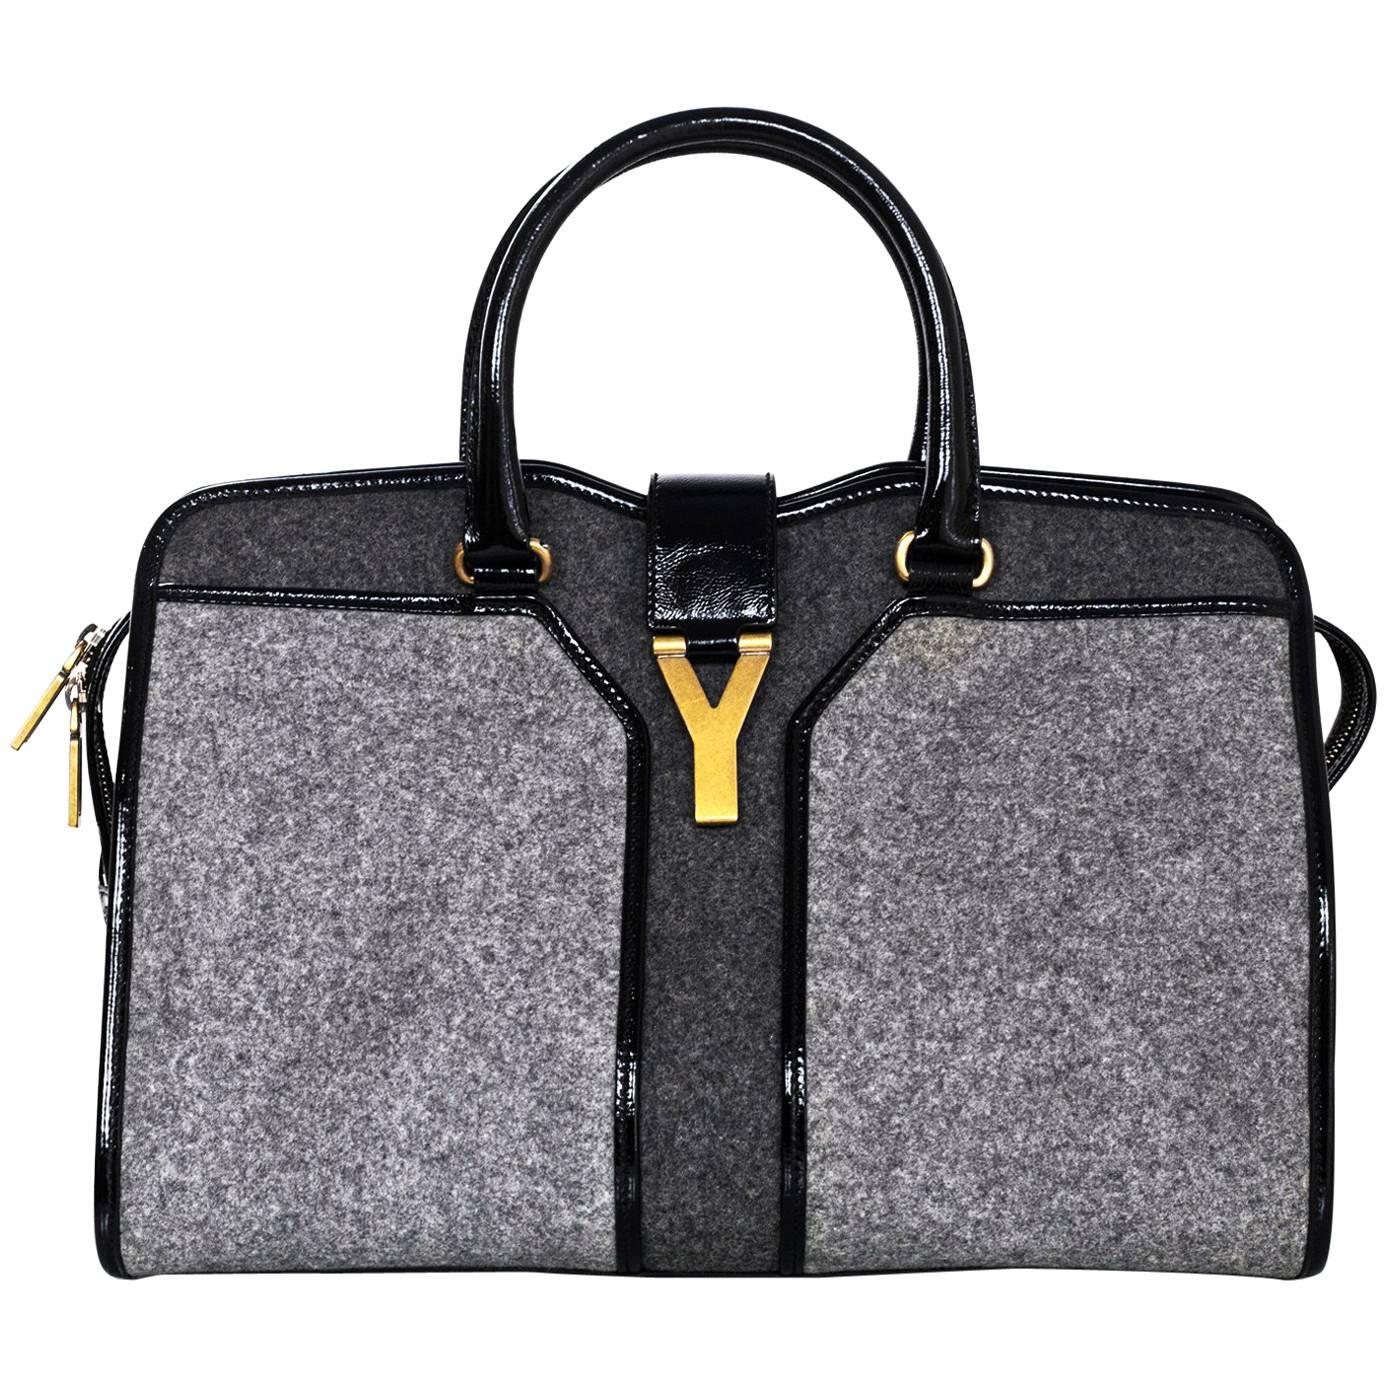 Yves Saint Laurent Cabas ChYc Medium Flannel and Patent Leather Tote Bag